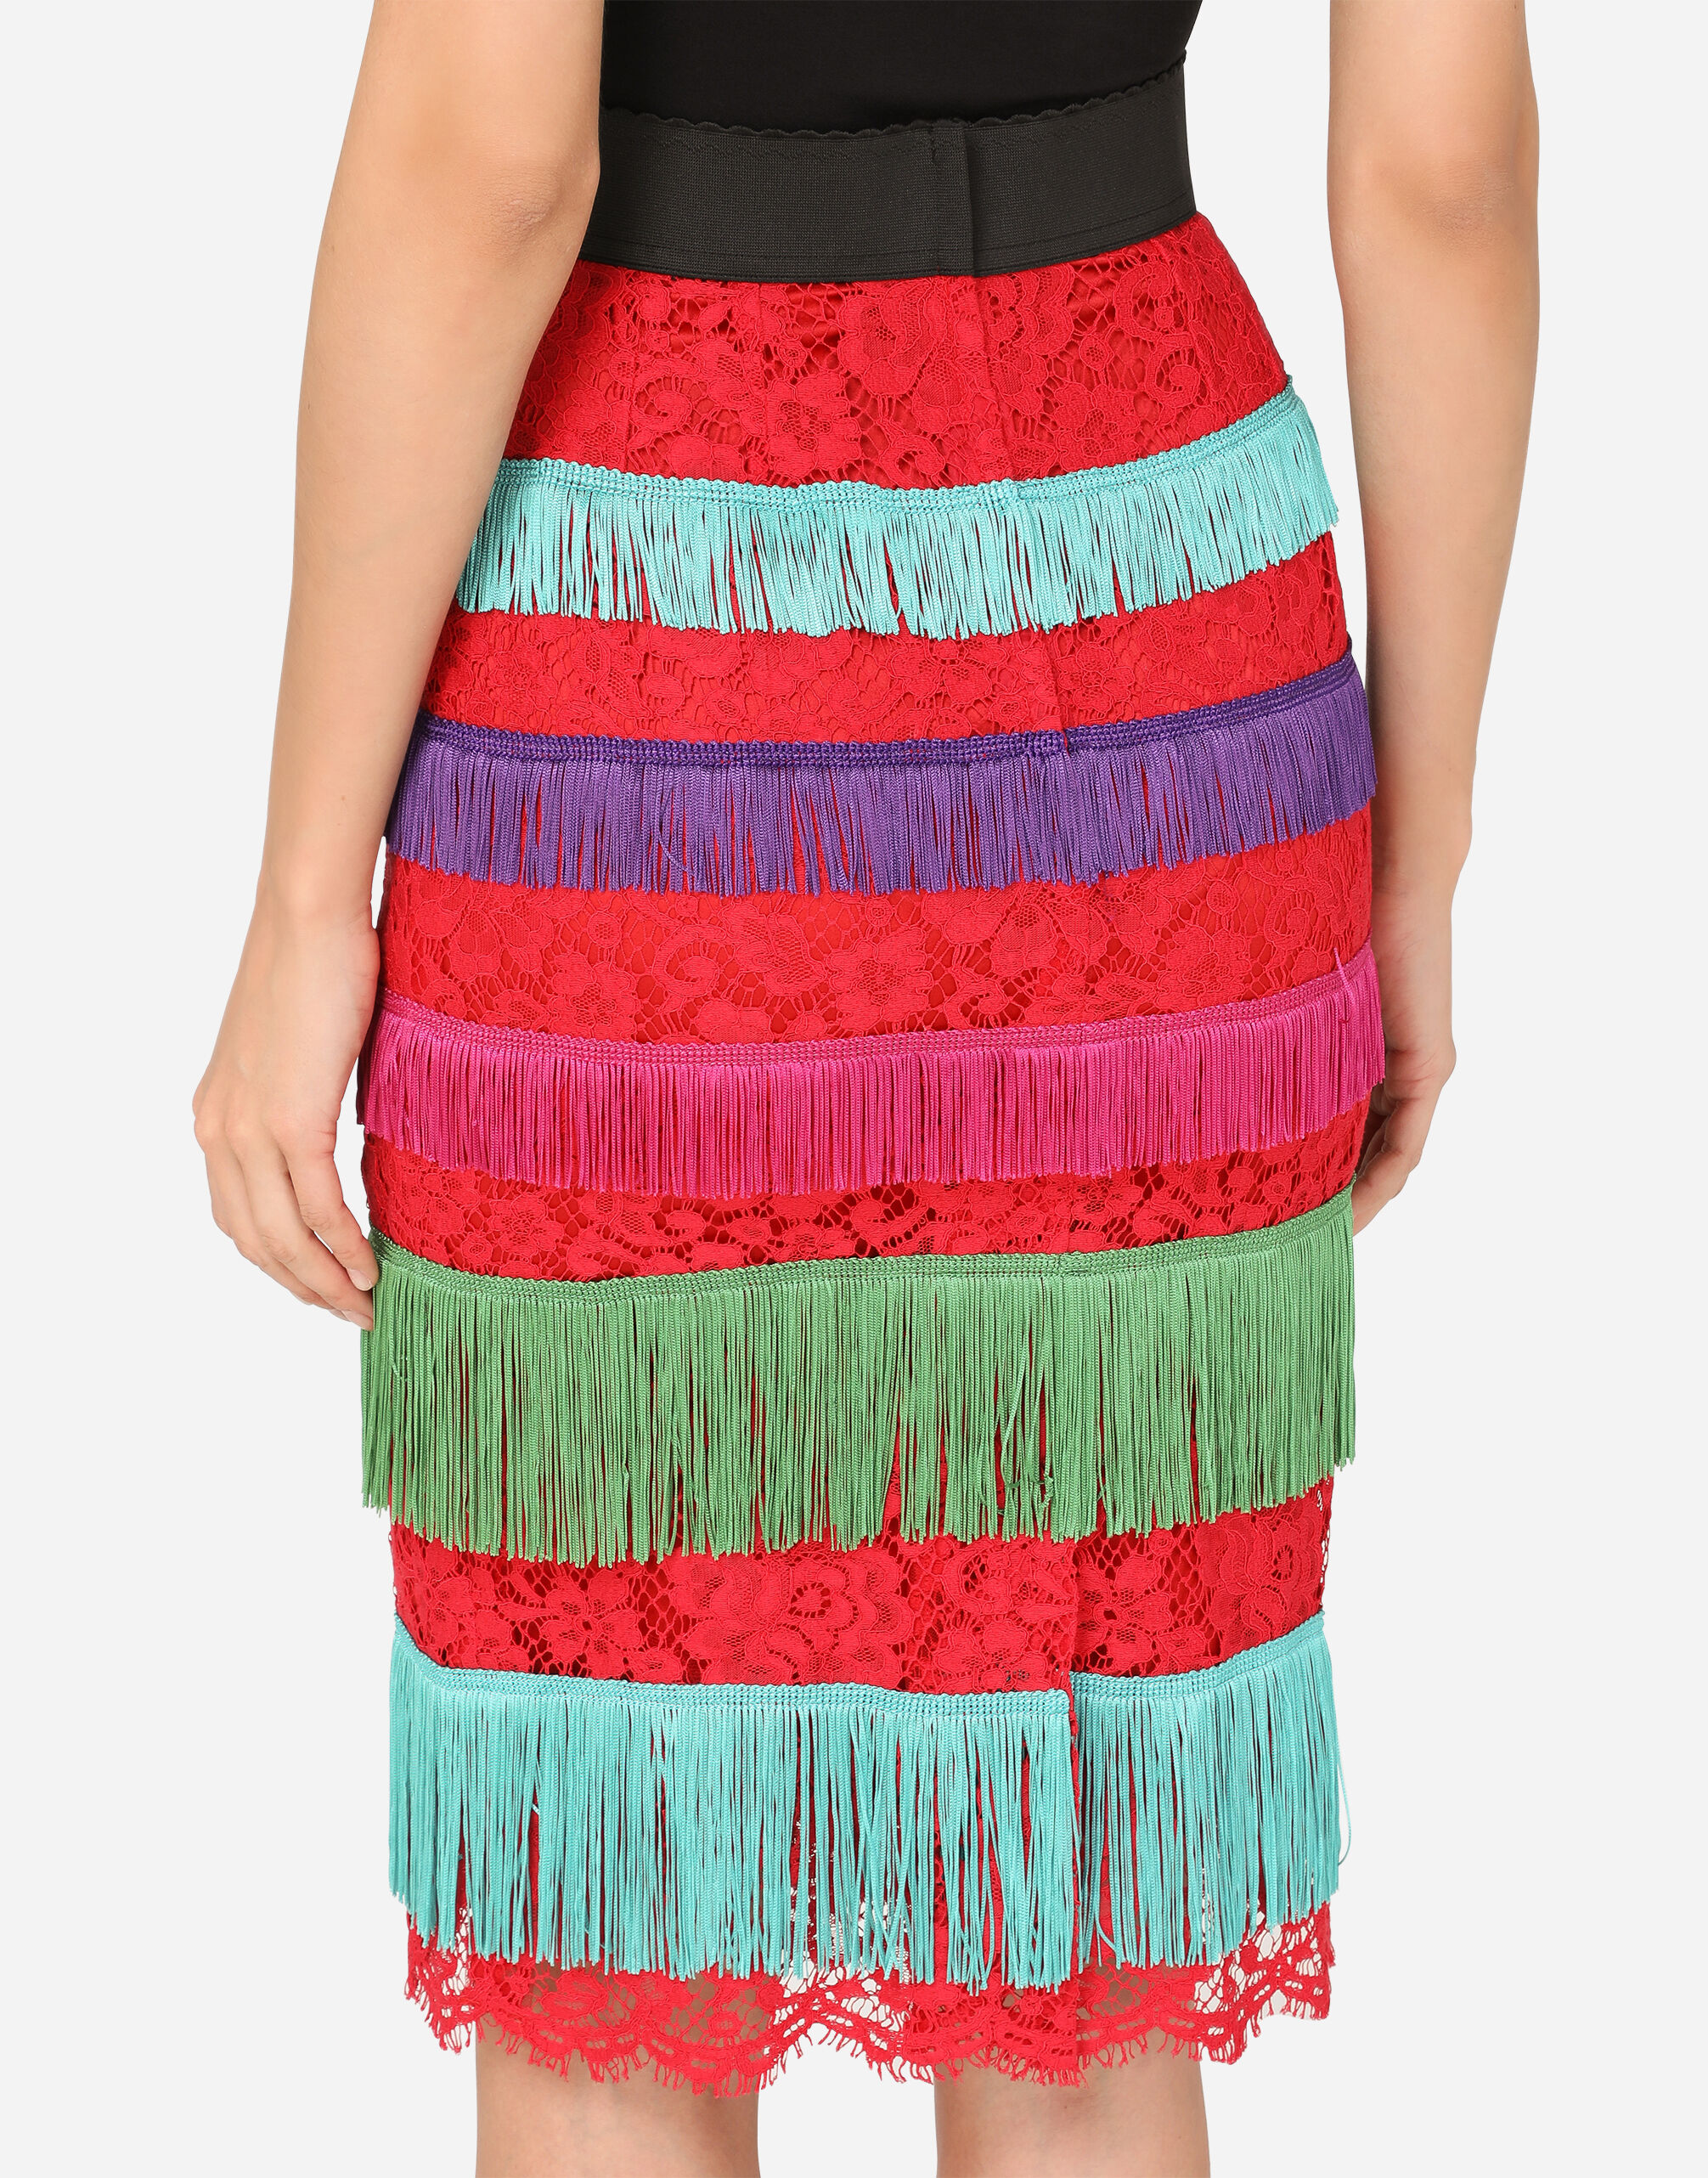 Lace midi skirt with fringed detailing